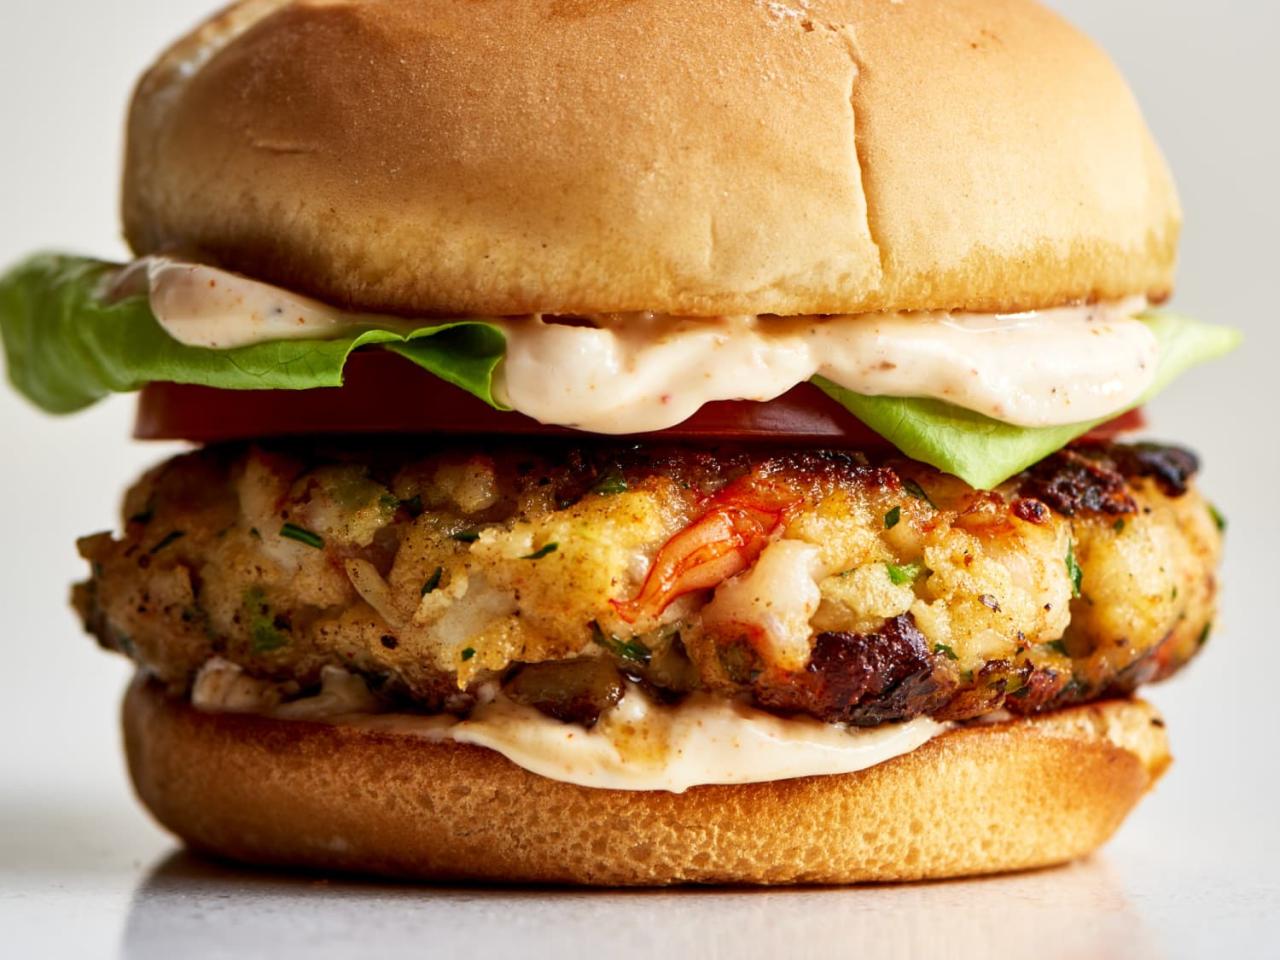 Shrimp Burger Recipe with Creole Spices | The Kitchn